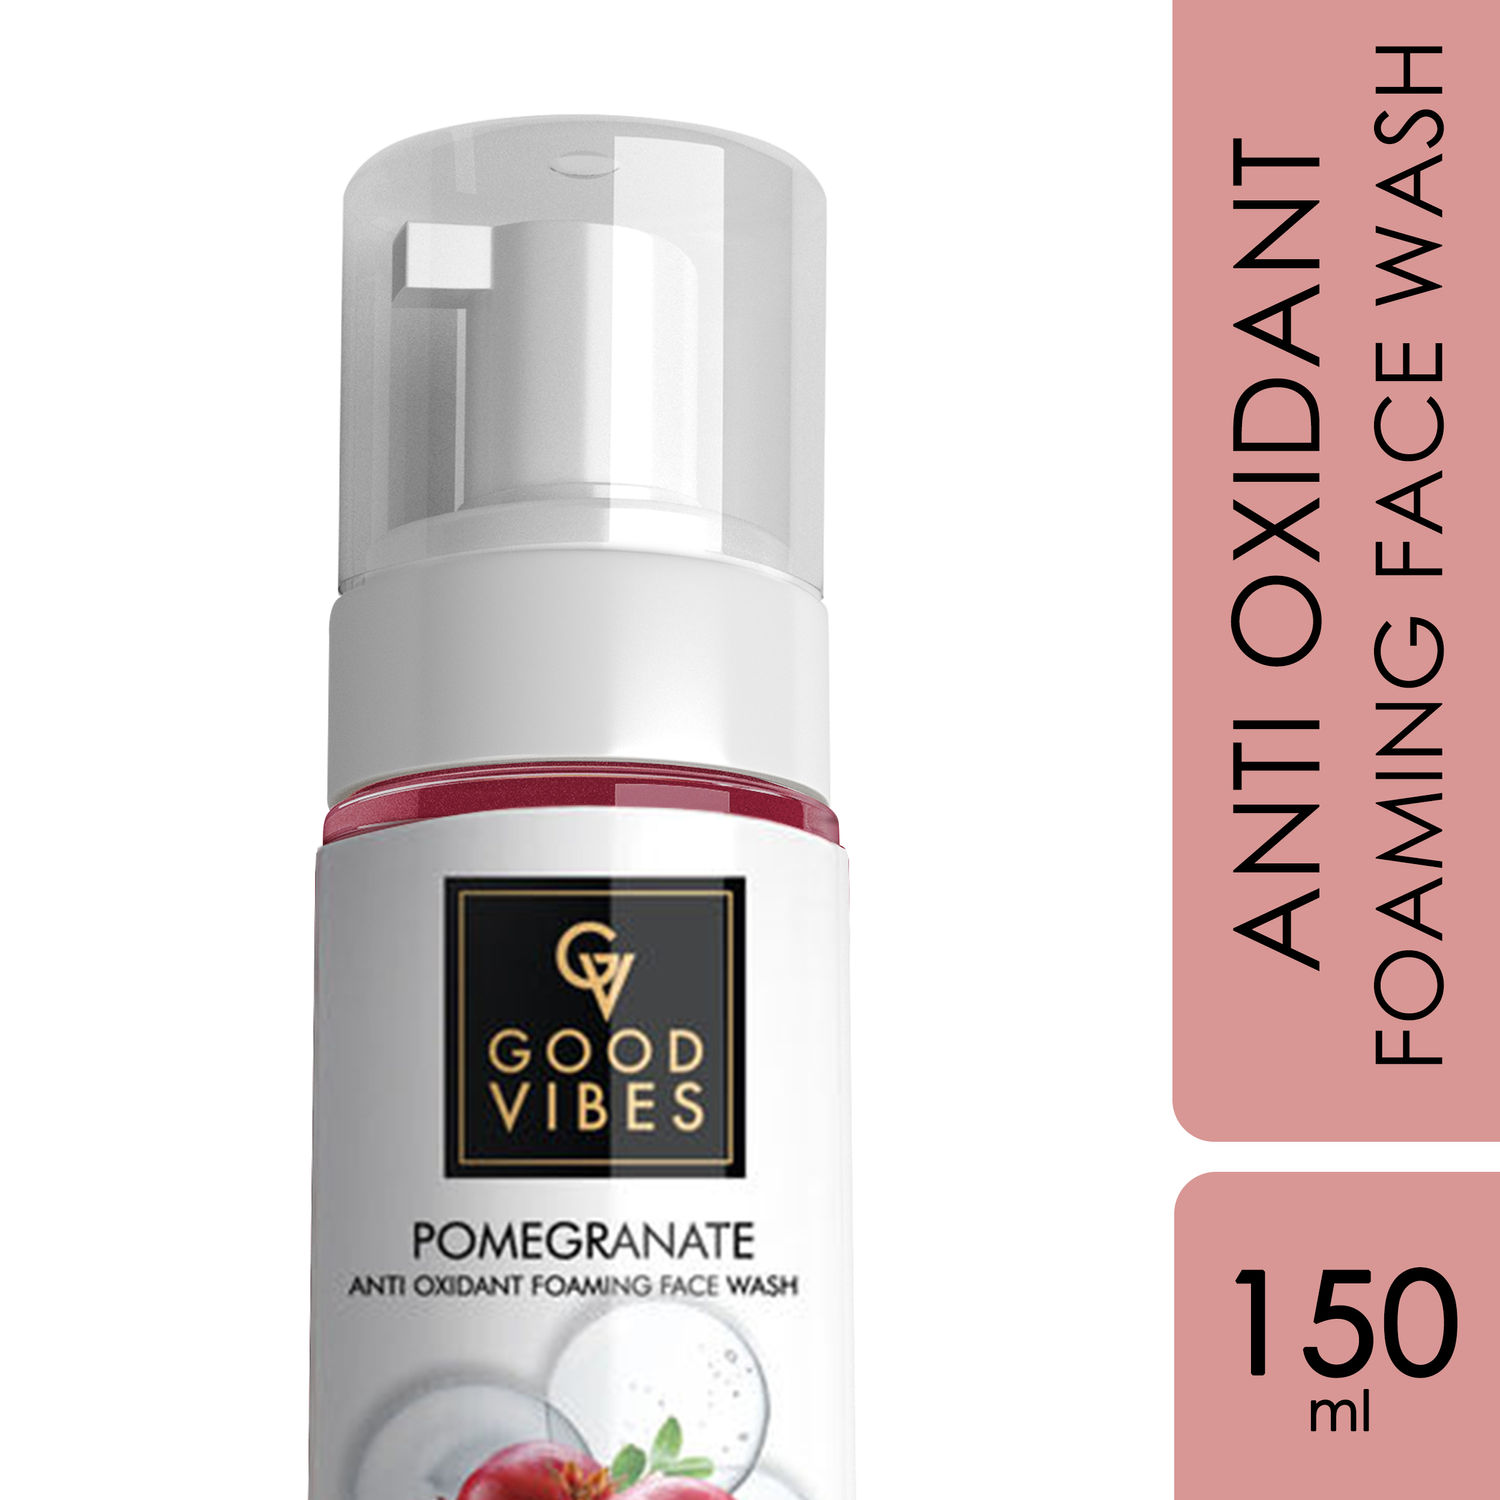 Buy Good Vibes Anti - Oxidant Foaming Face Wash - Pomegranate (150ml) - Purplle